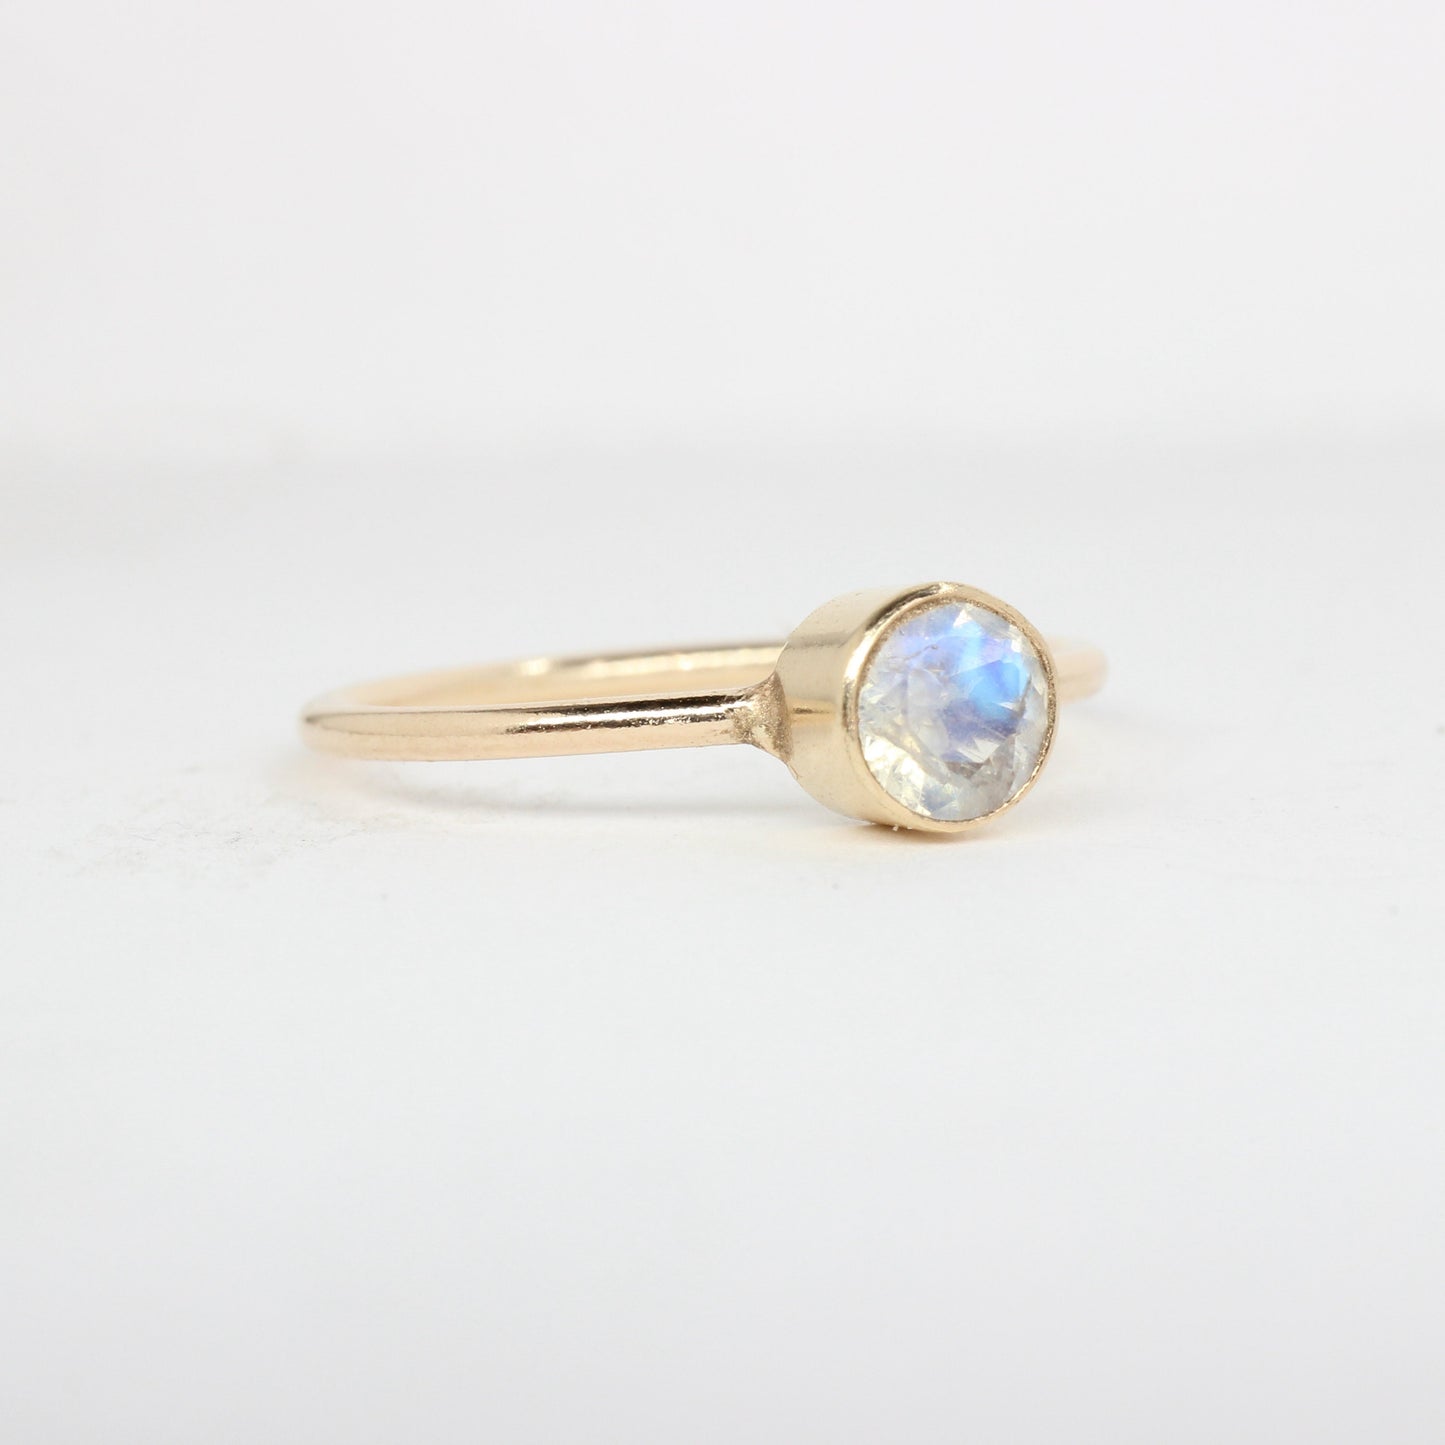 Rainbow Moonstone Stacking Ring in 14K Gold Filled // 5mm Faceted Gemstone June Birthstone